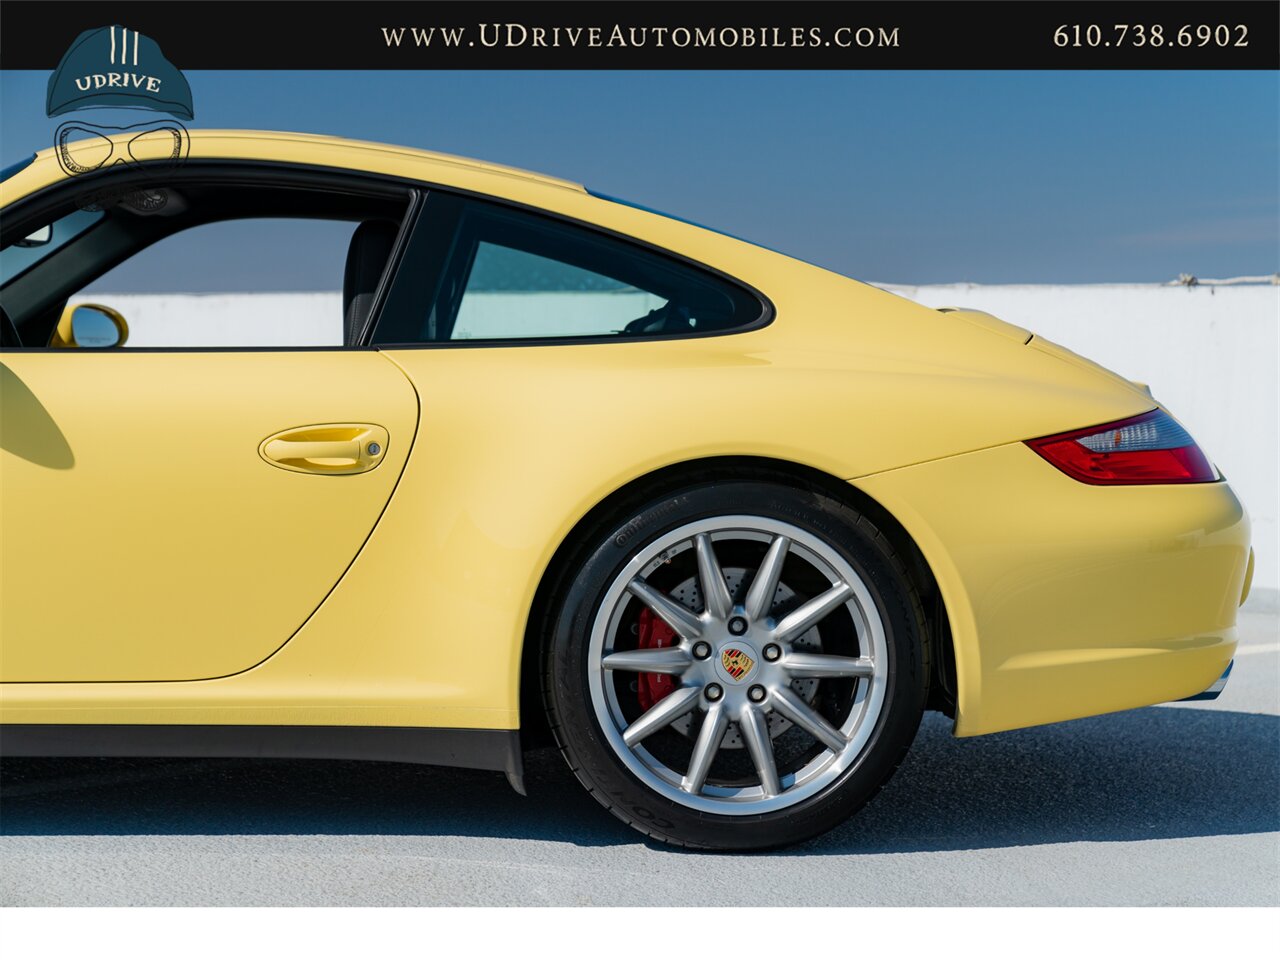 2007 Porsche 911 Carrera 4S 997 C4S Paint To Sample Pastel Yellow  6 Speed Sport Chrono Full Leather Yellow Gauges - Photo 24 - West Chester, PA 19382